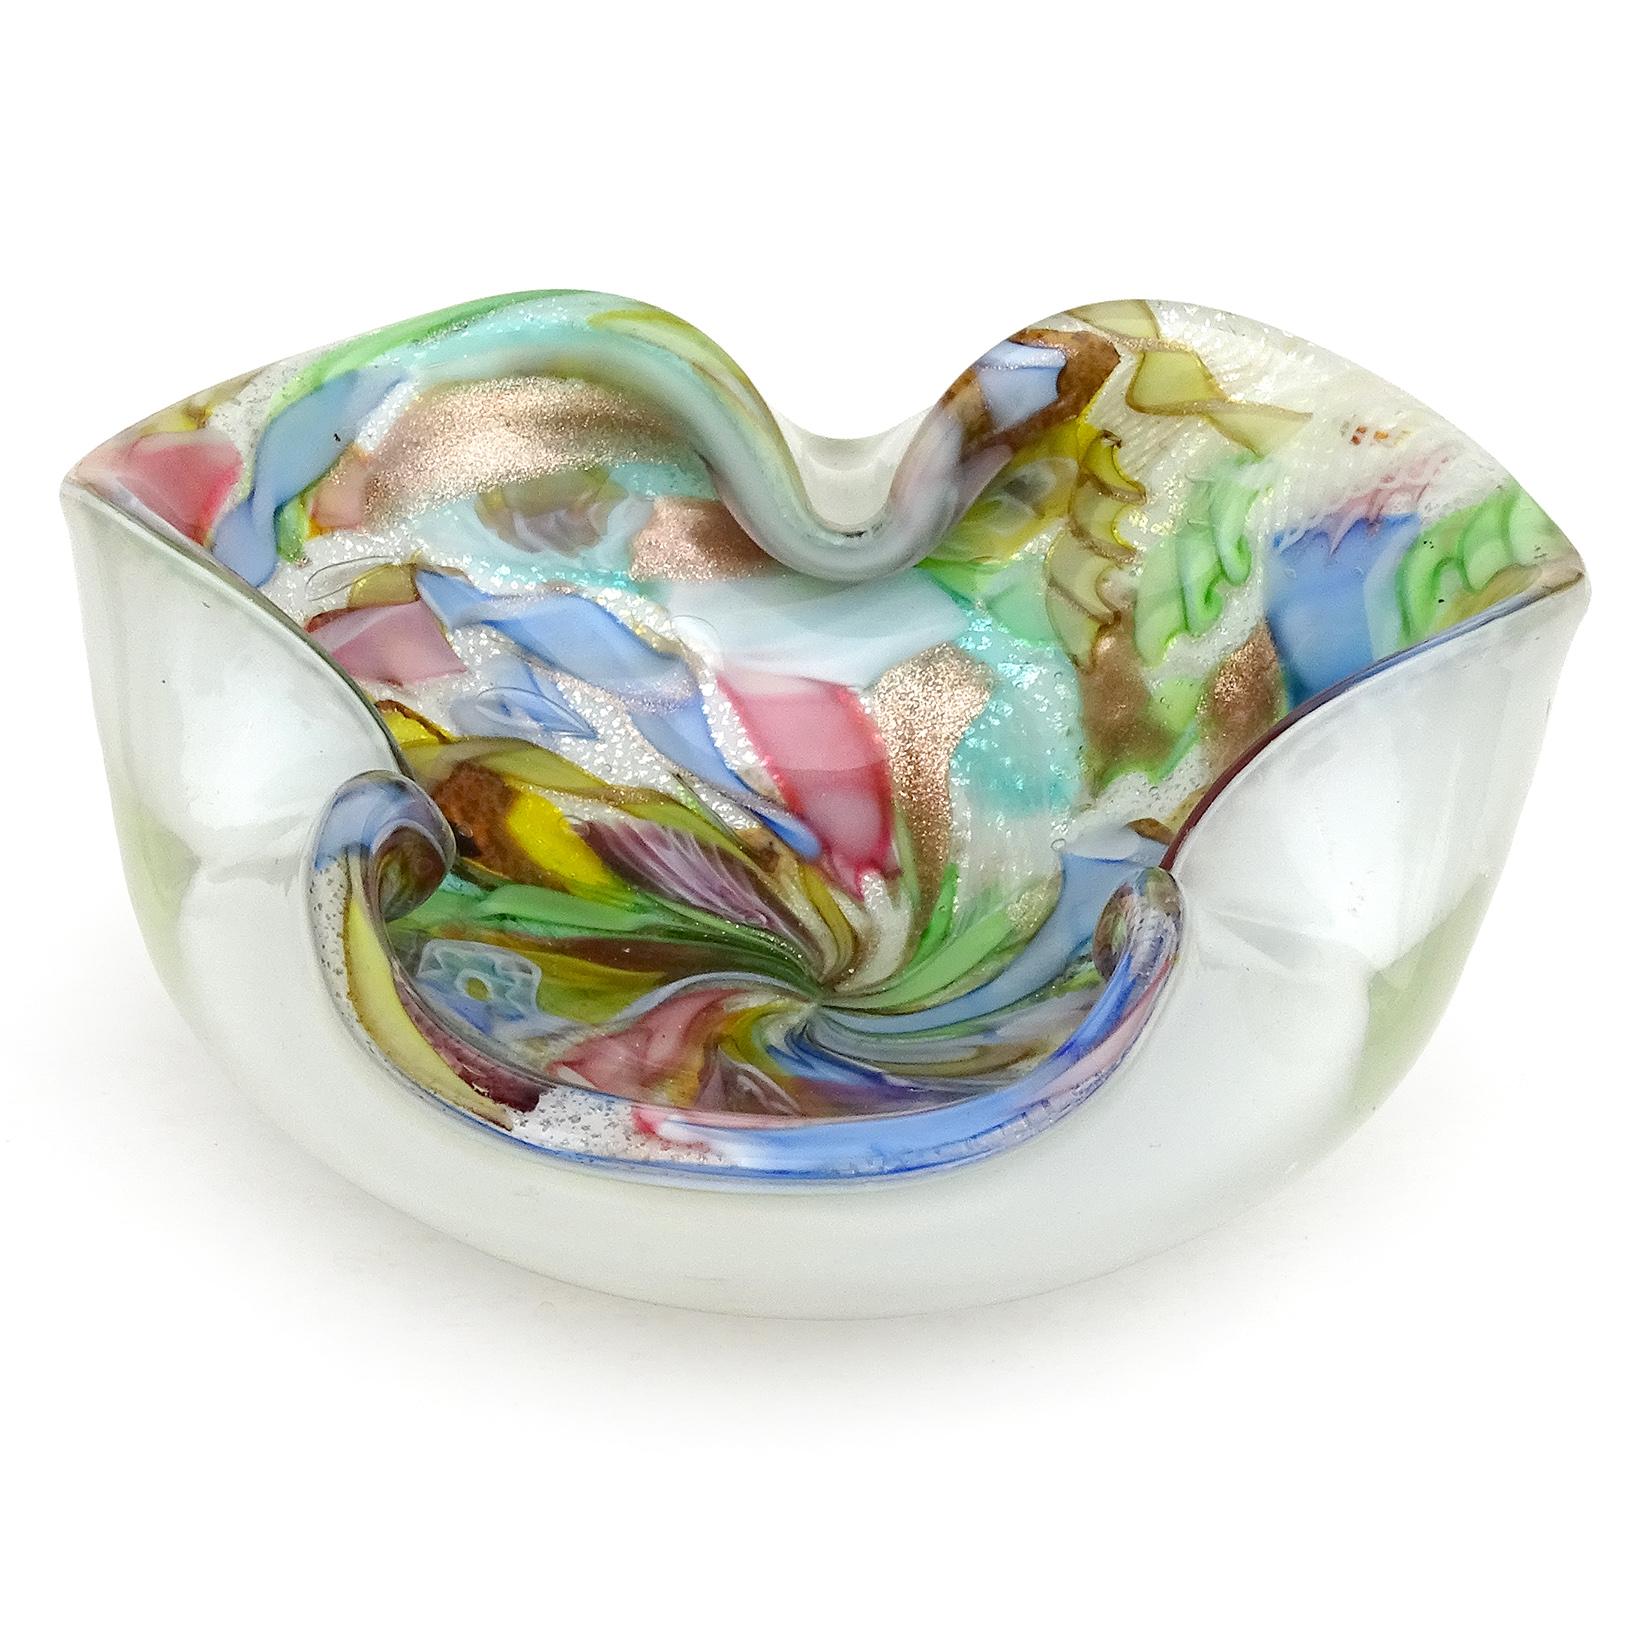 Beautiful vintage Murano hand blown white, silver flecks, copper aventurine, millefiori flower murrines and twisted ribbons Italian art glass bowl / ashtray. Documented to the A.Ve.M. (Arte Vetraria Muranese) company. The pattern is featured in the